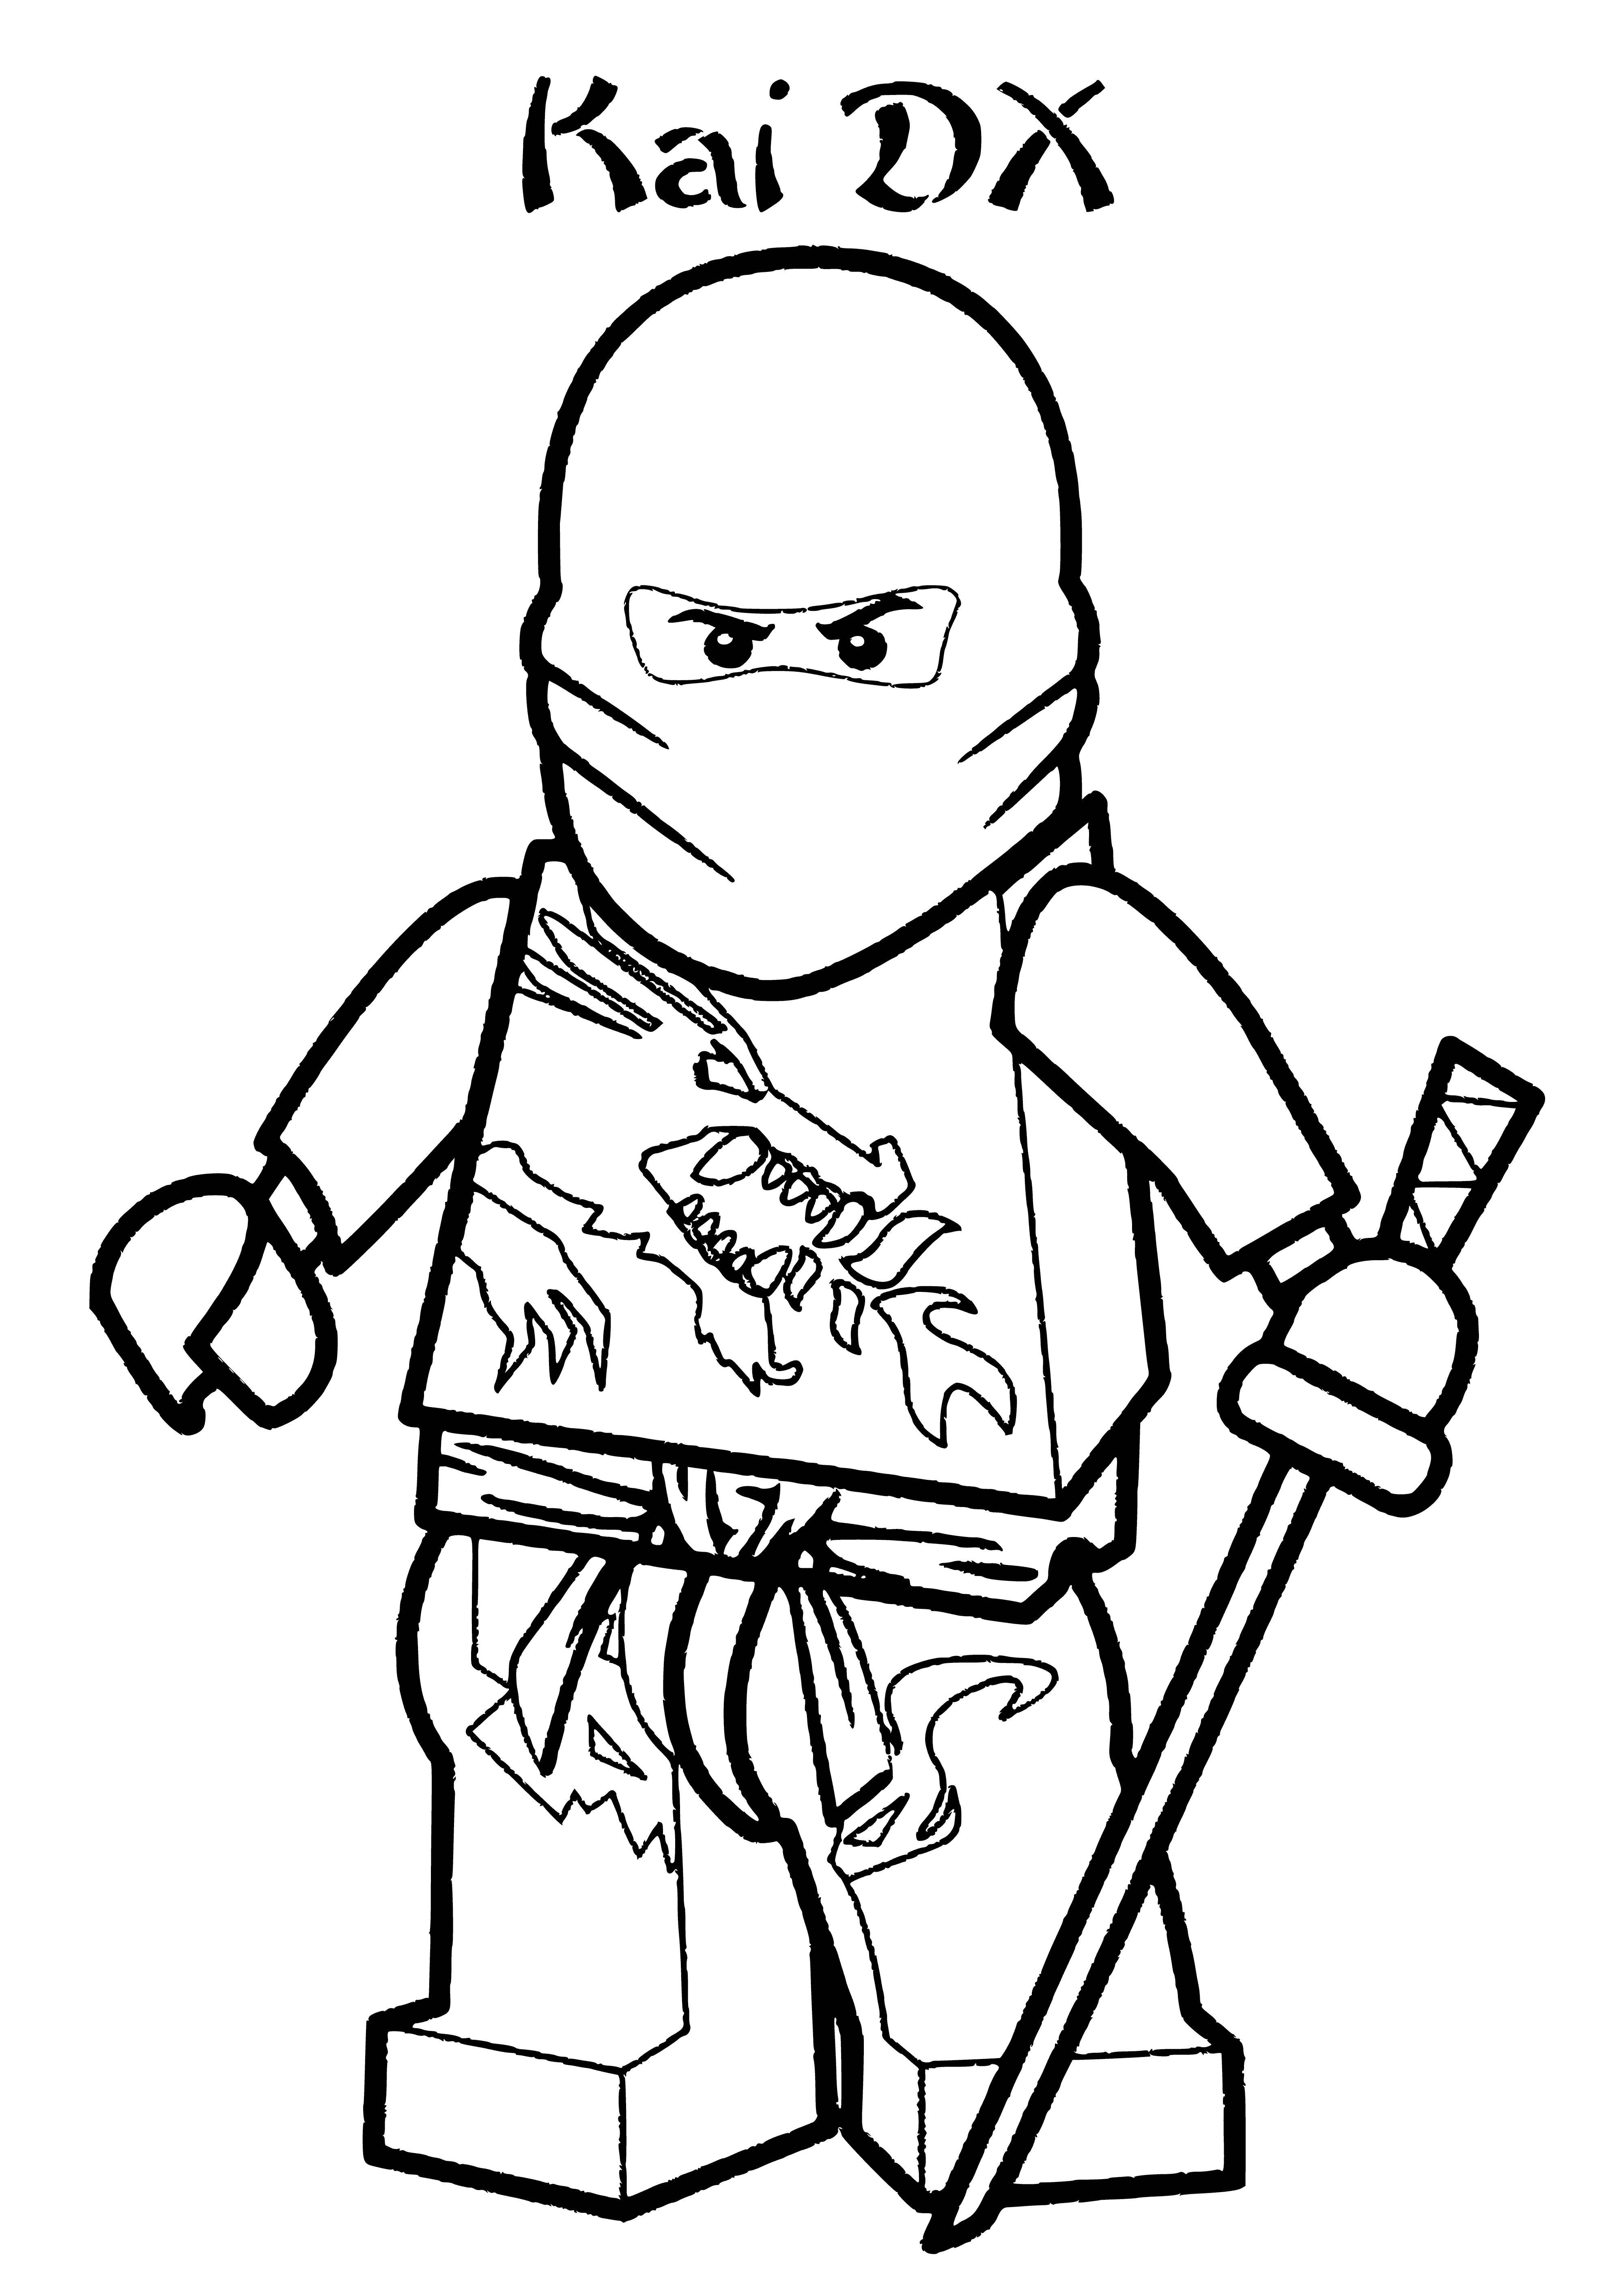 coloring page: Kai, a ninja from LEGO Ninjago, stands in the center of the coloring page. He wears a red & gold outfit and wields a gold sword. A red dragon with gold wings flies behind him.